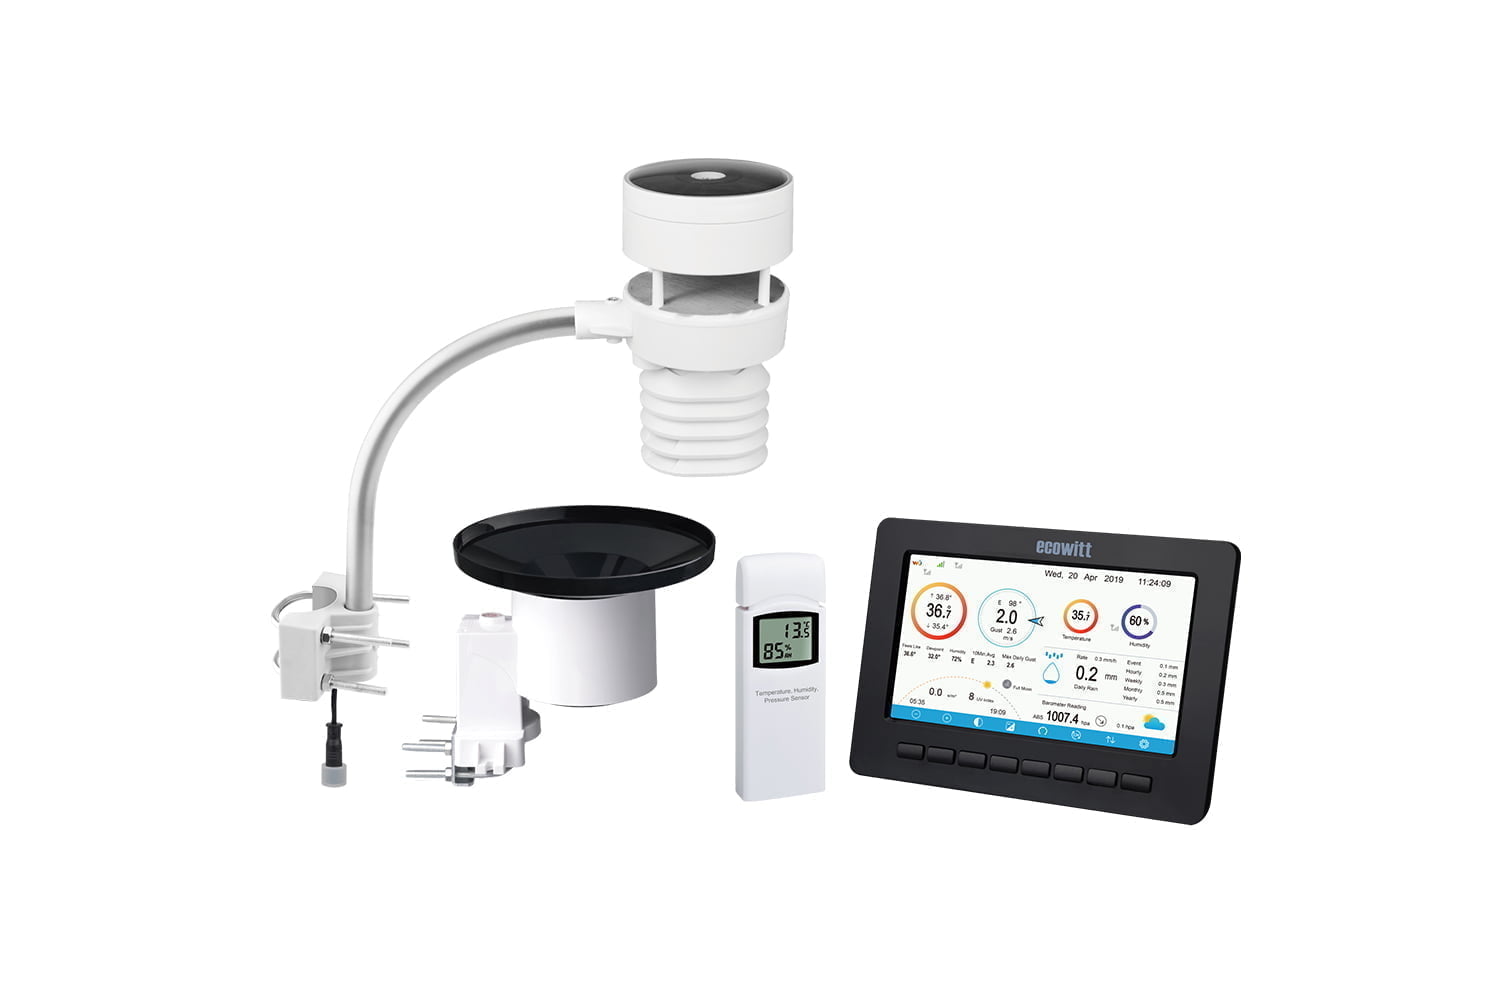 Which Ecowitt Weather Station Should I Buy? Our 5 Favorites